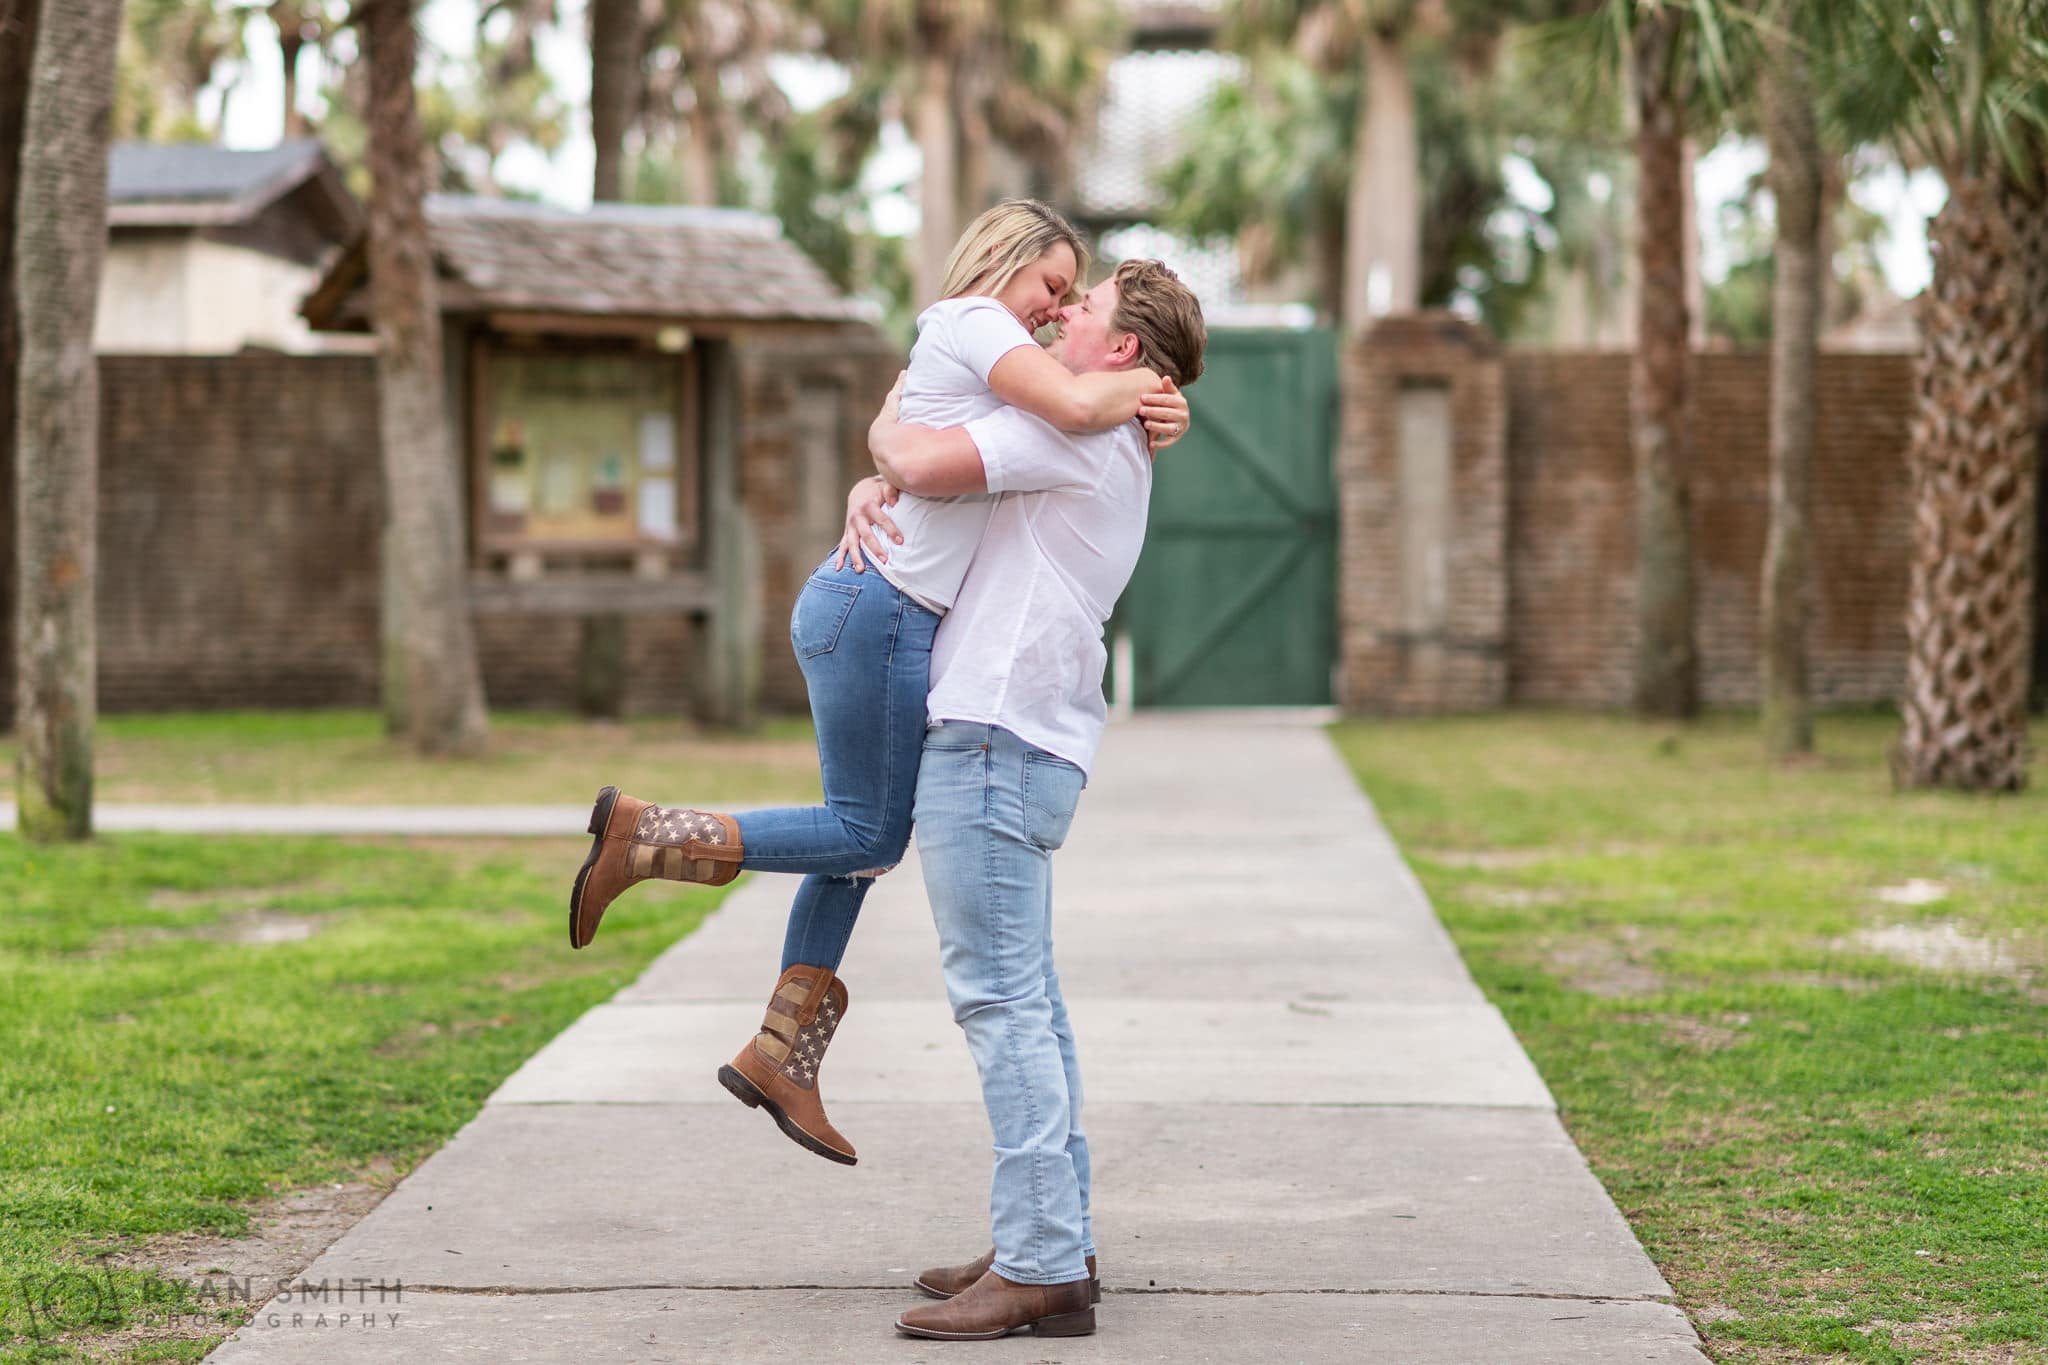 Lifting fiance into the air in front of the castle - Huntington Beach State Park